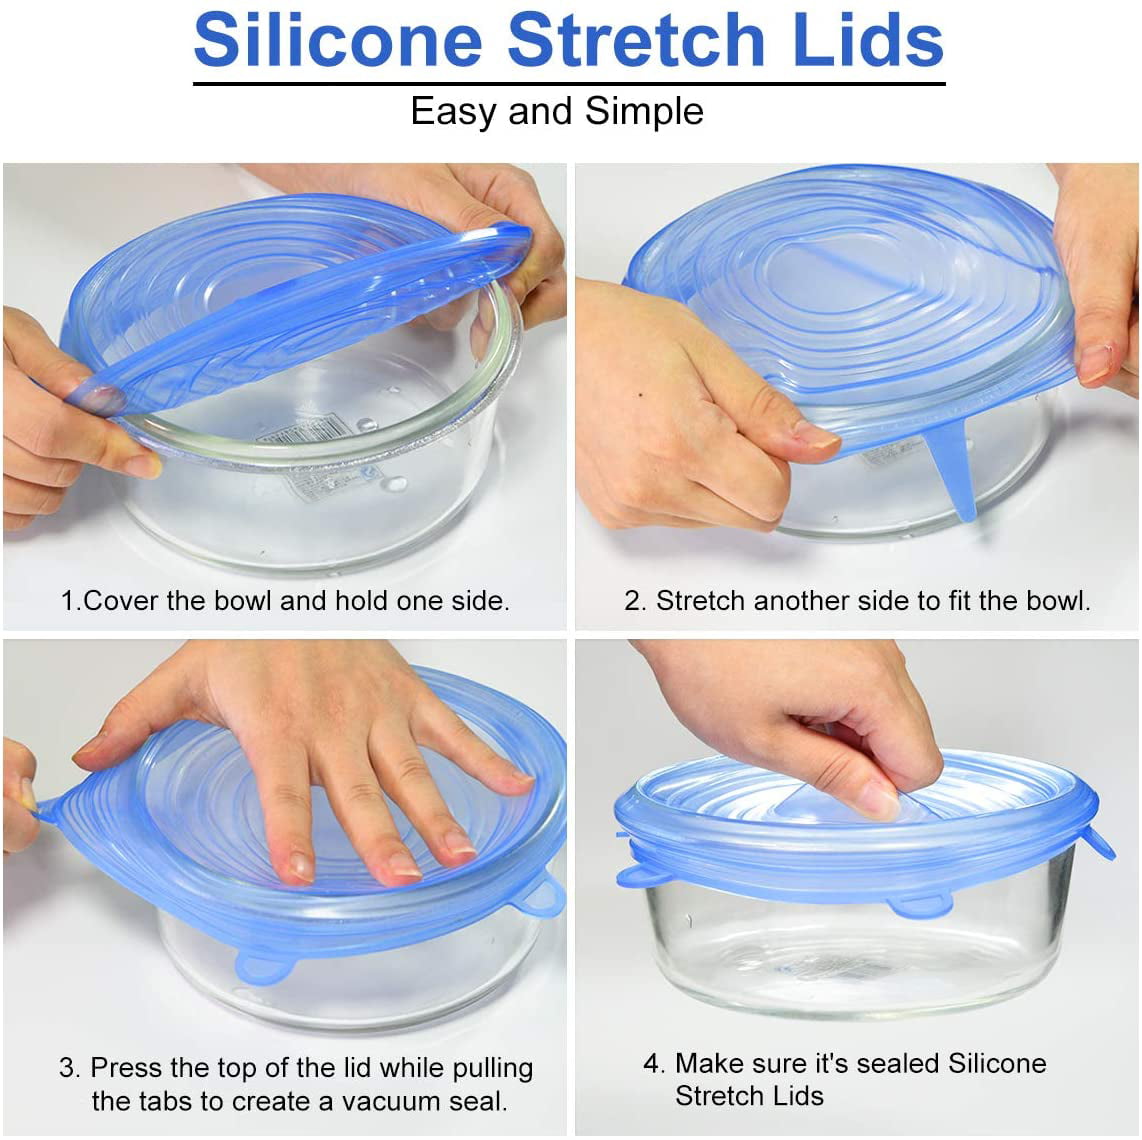 12 PCS Stretchy Silicone Lid Reusable elástico Silicone Lids Silicone 6 en Various Sizes Silicone Stretch Lids fuerte Healthy and Airtight Silicone Lid for Bowls 